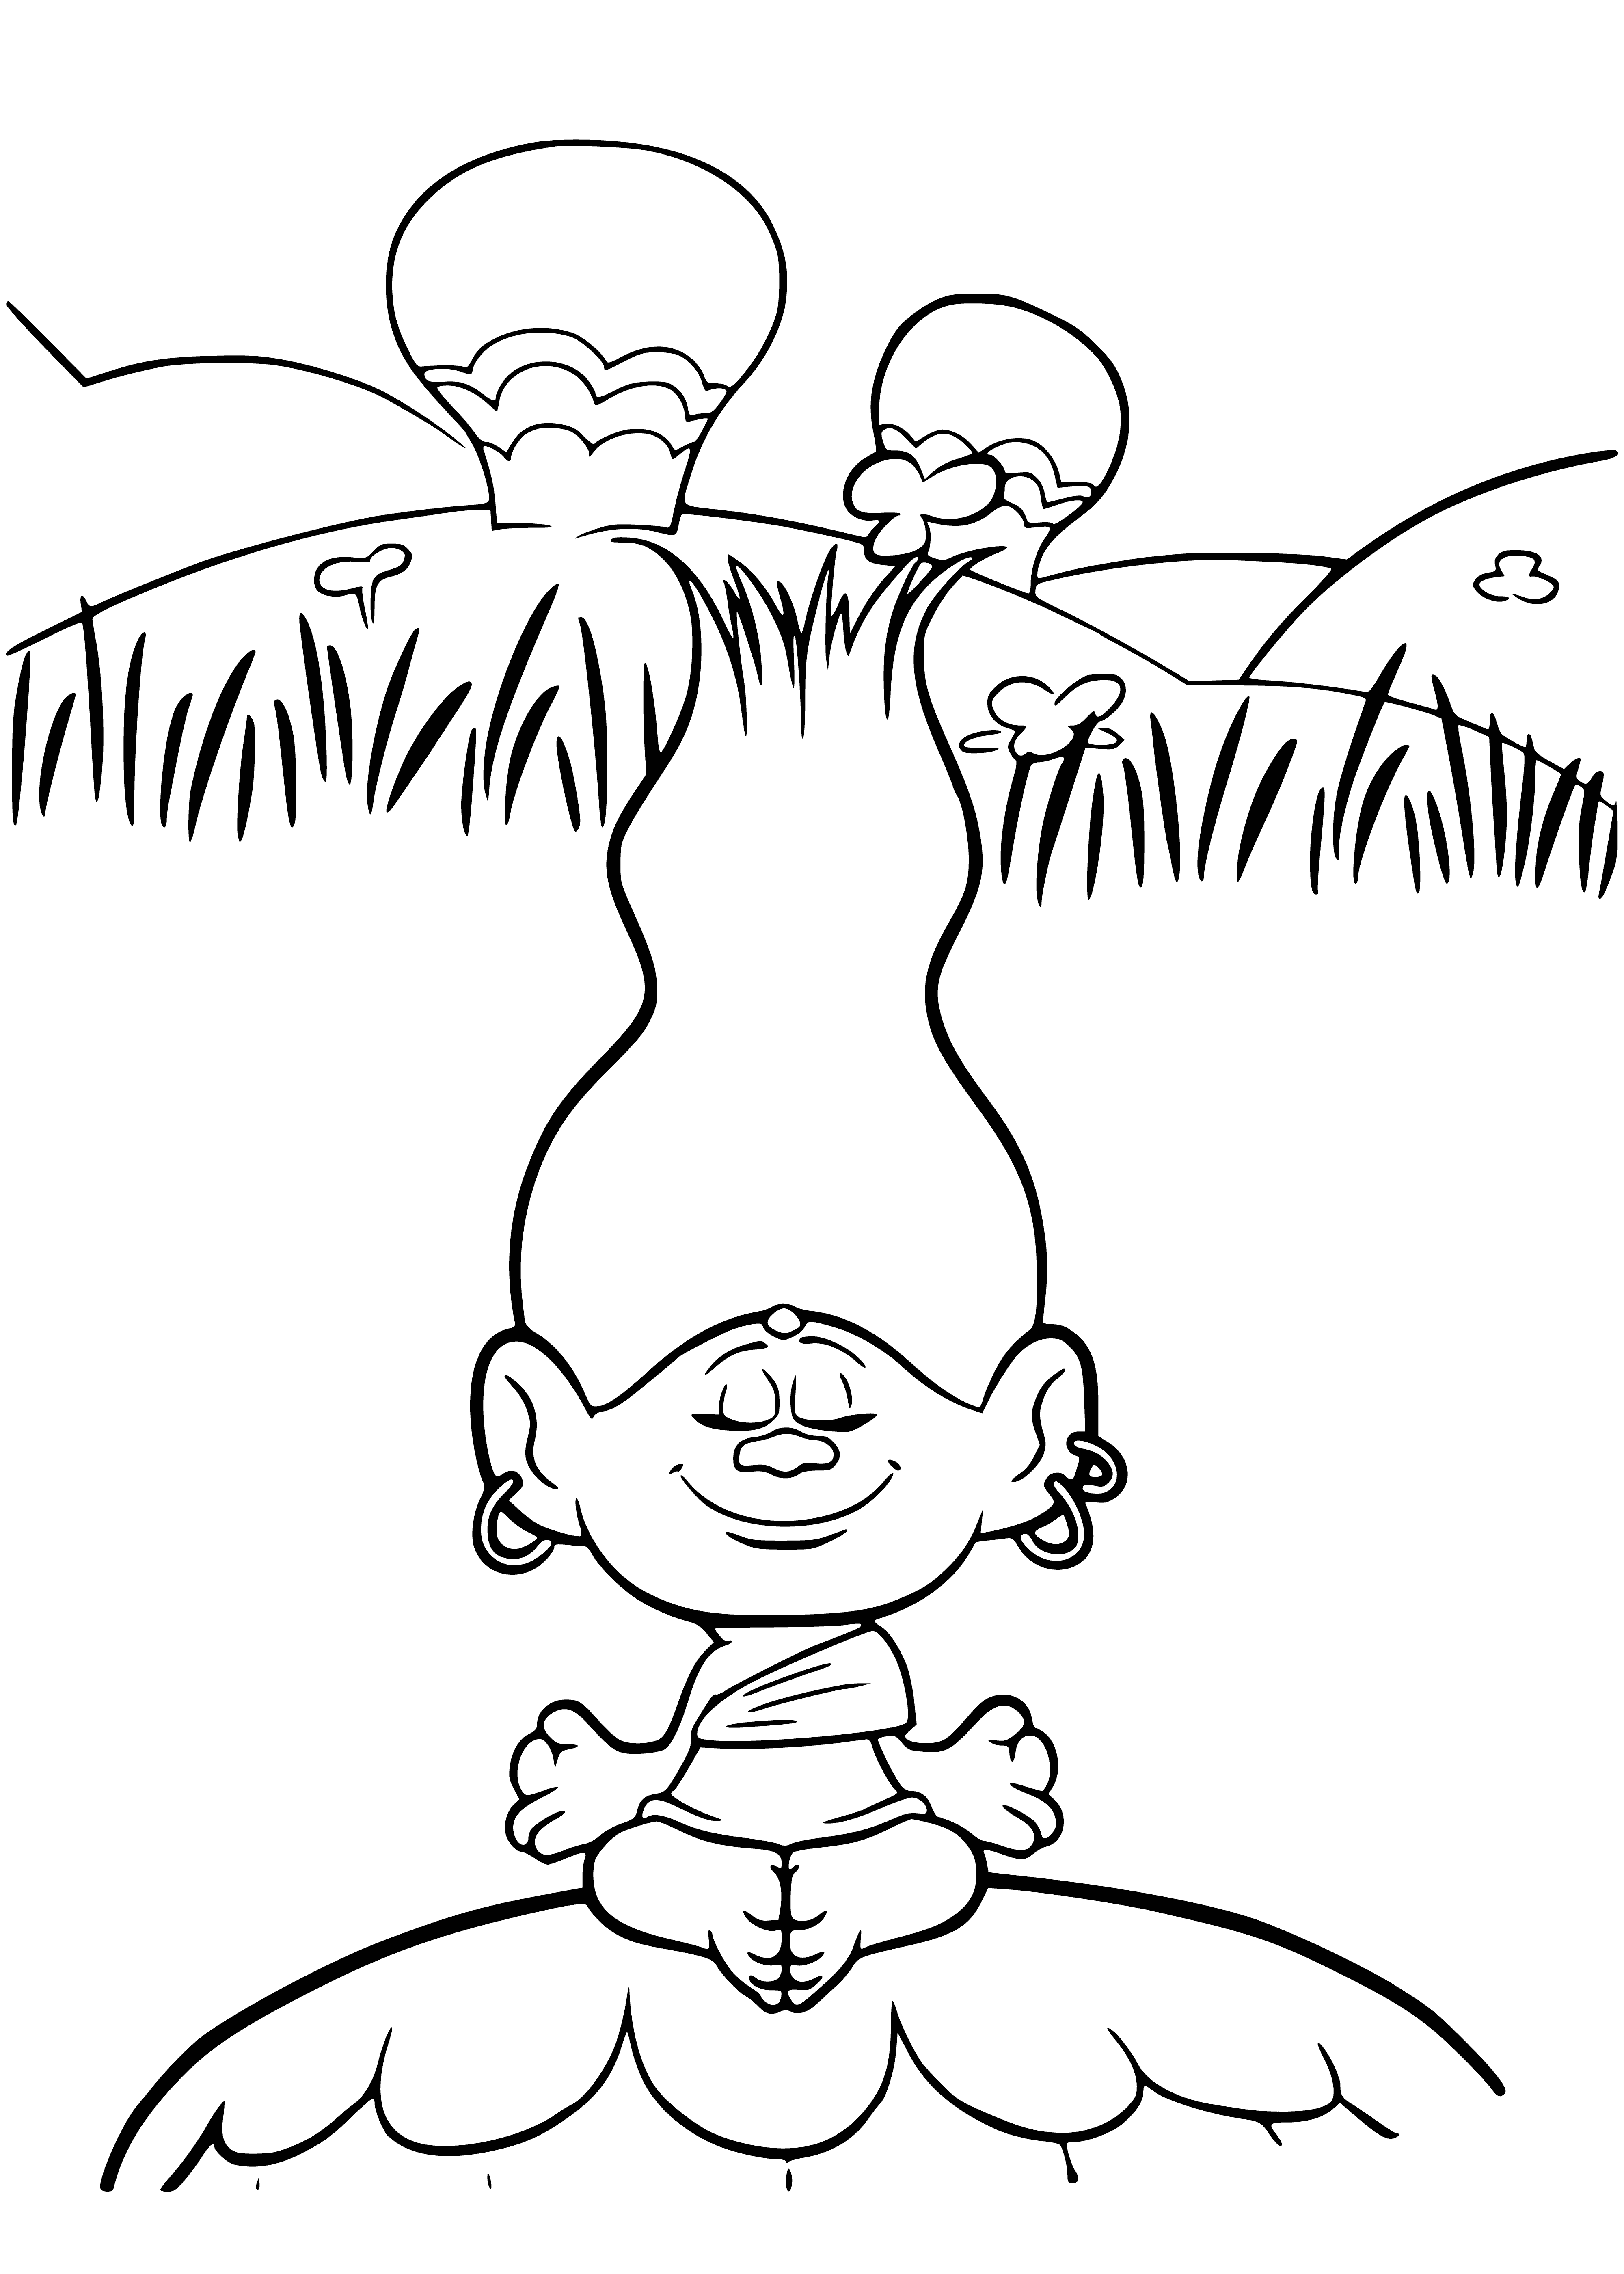 coloring page: Troll meditates in a green forest, wearing robe with calm & serene look. Hands & eyes closed in yoga-like position.